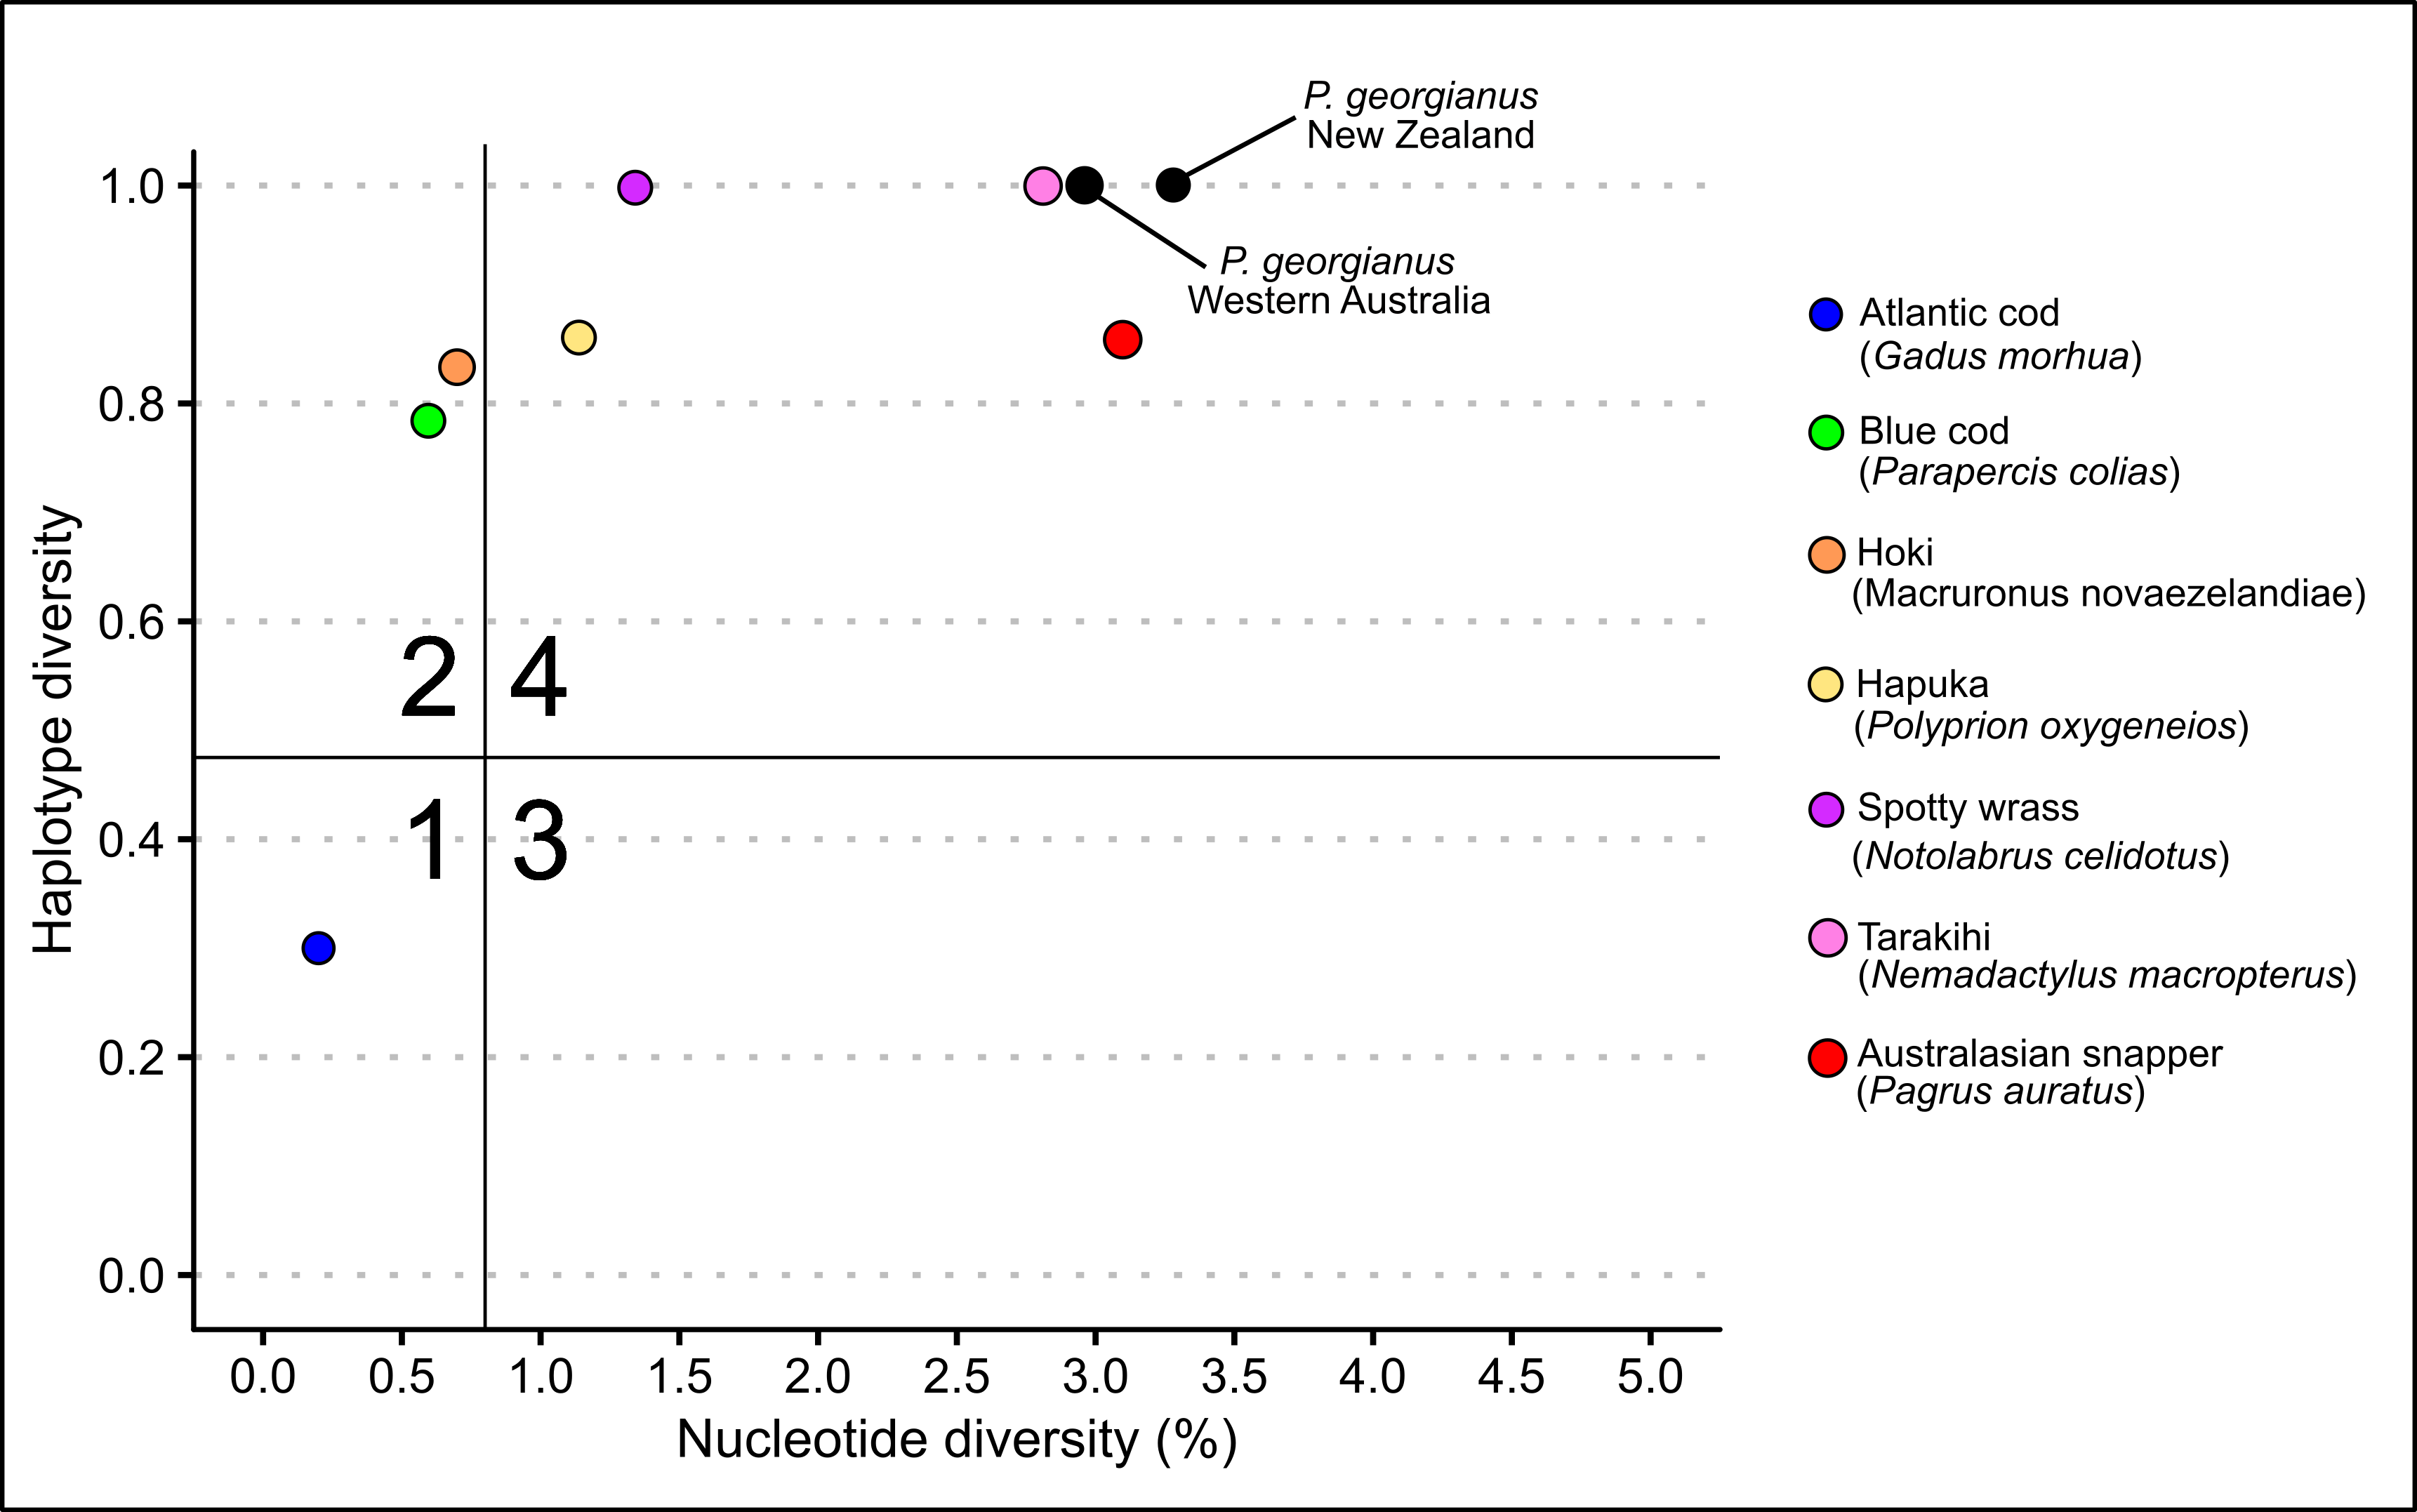 Demographic classes of New Zealand and Western Australian *P. georgianus* compared to several other New Zealand fishery species.